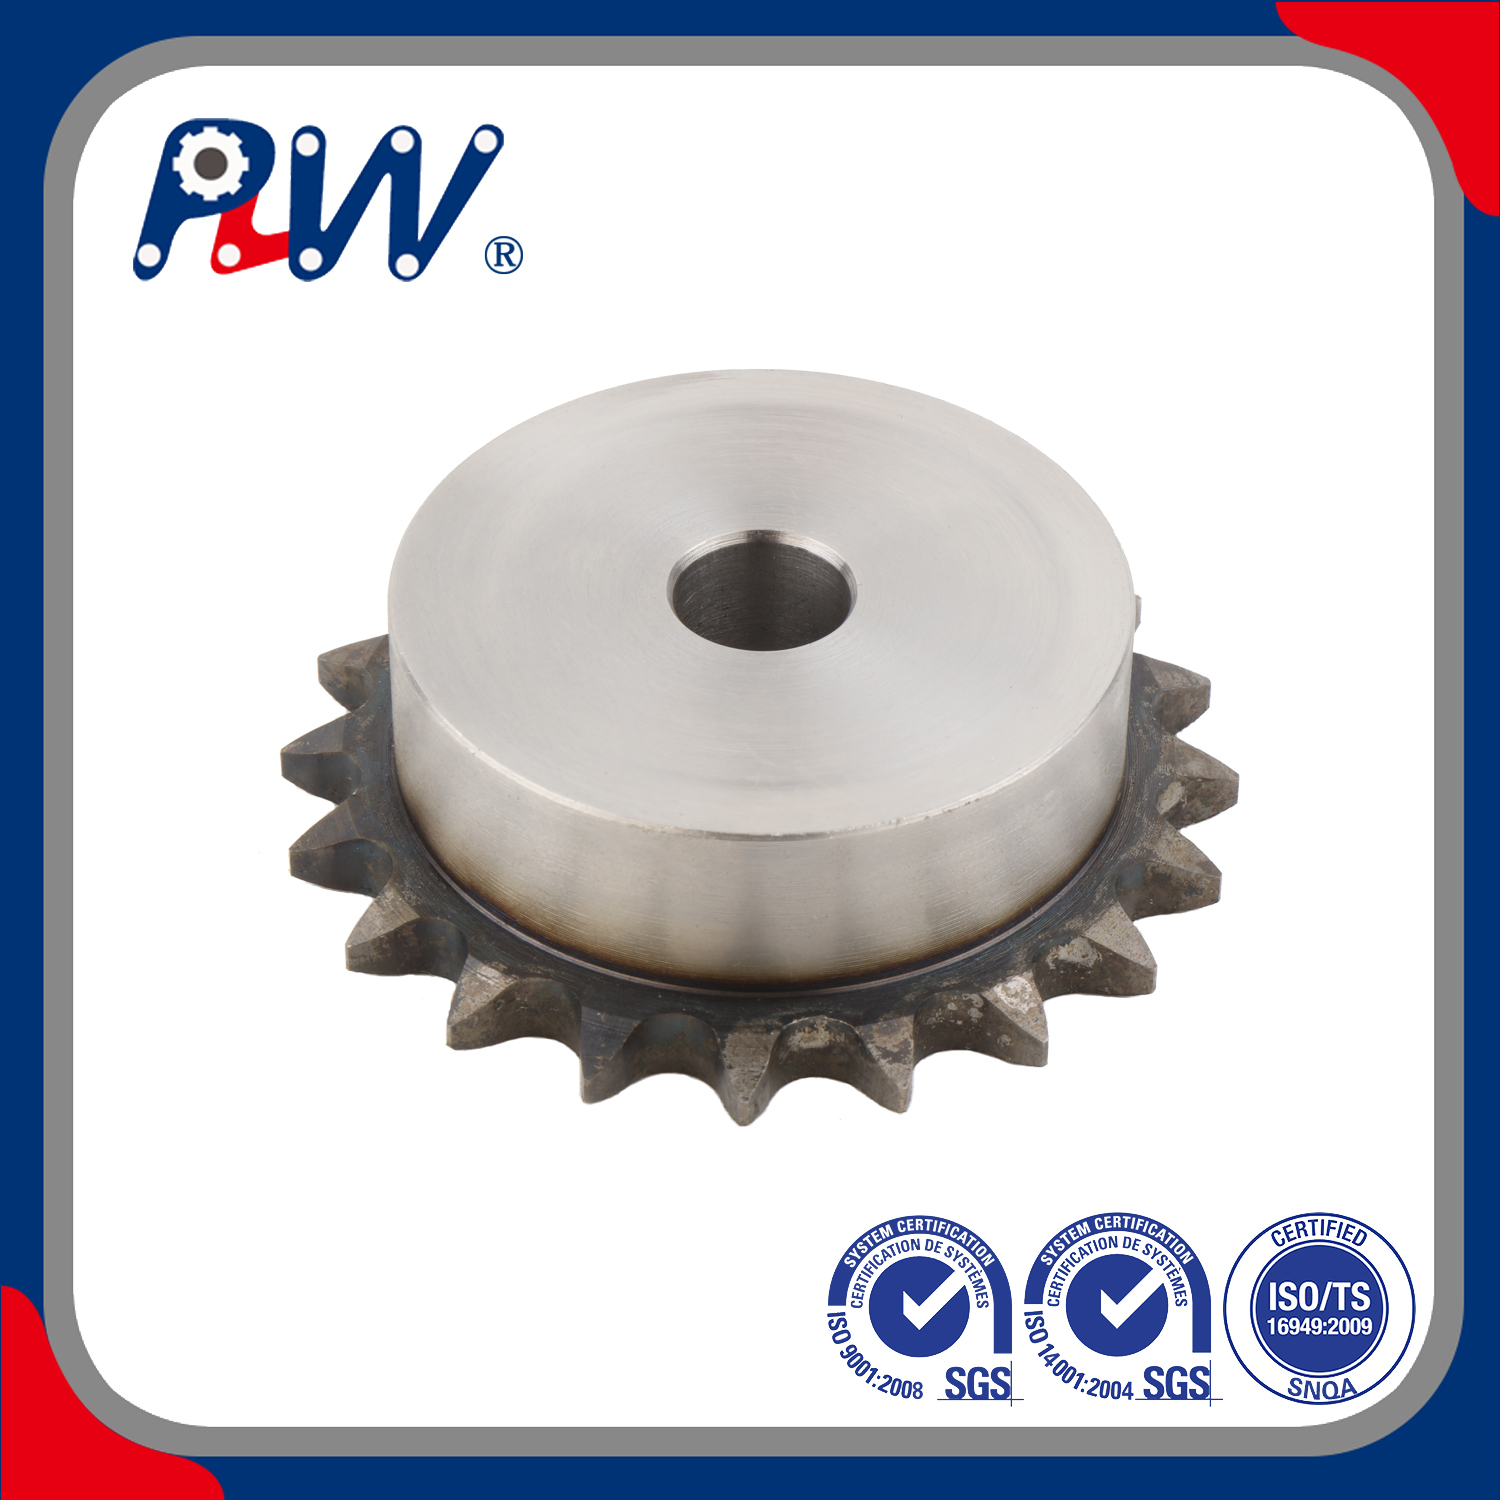 40b-20 DIN Standard Teeth Surface Heating Treatment Sprockets for B Series Roller Chain